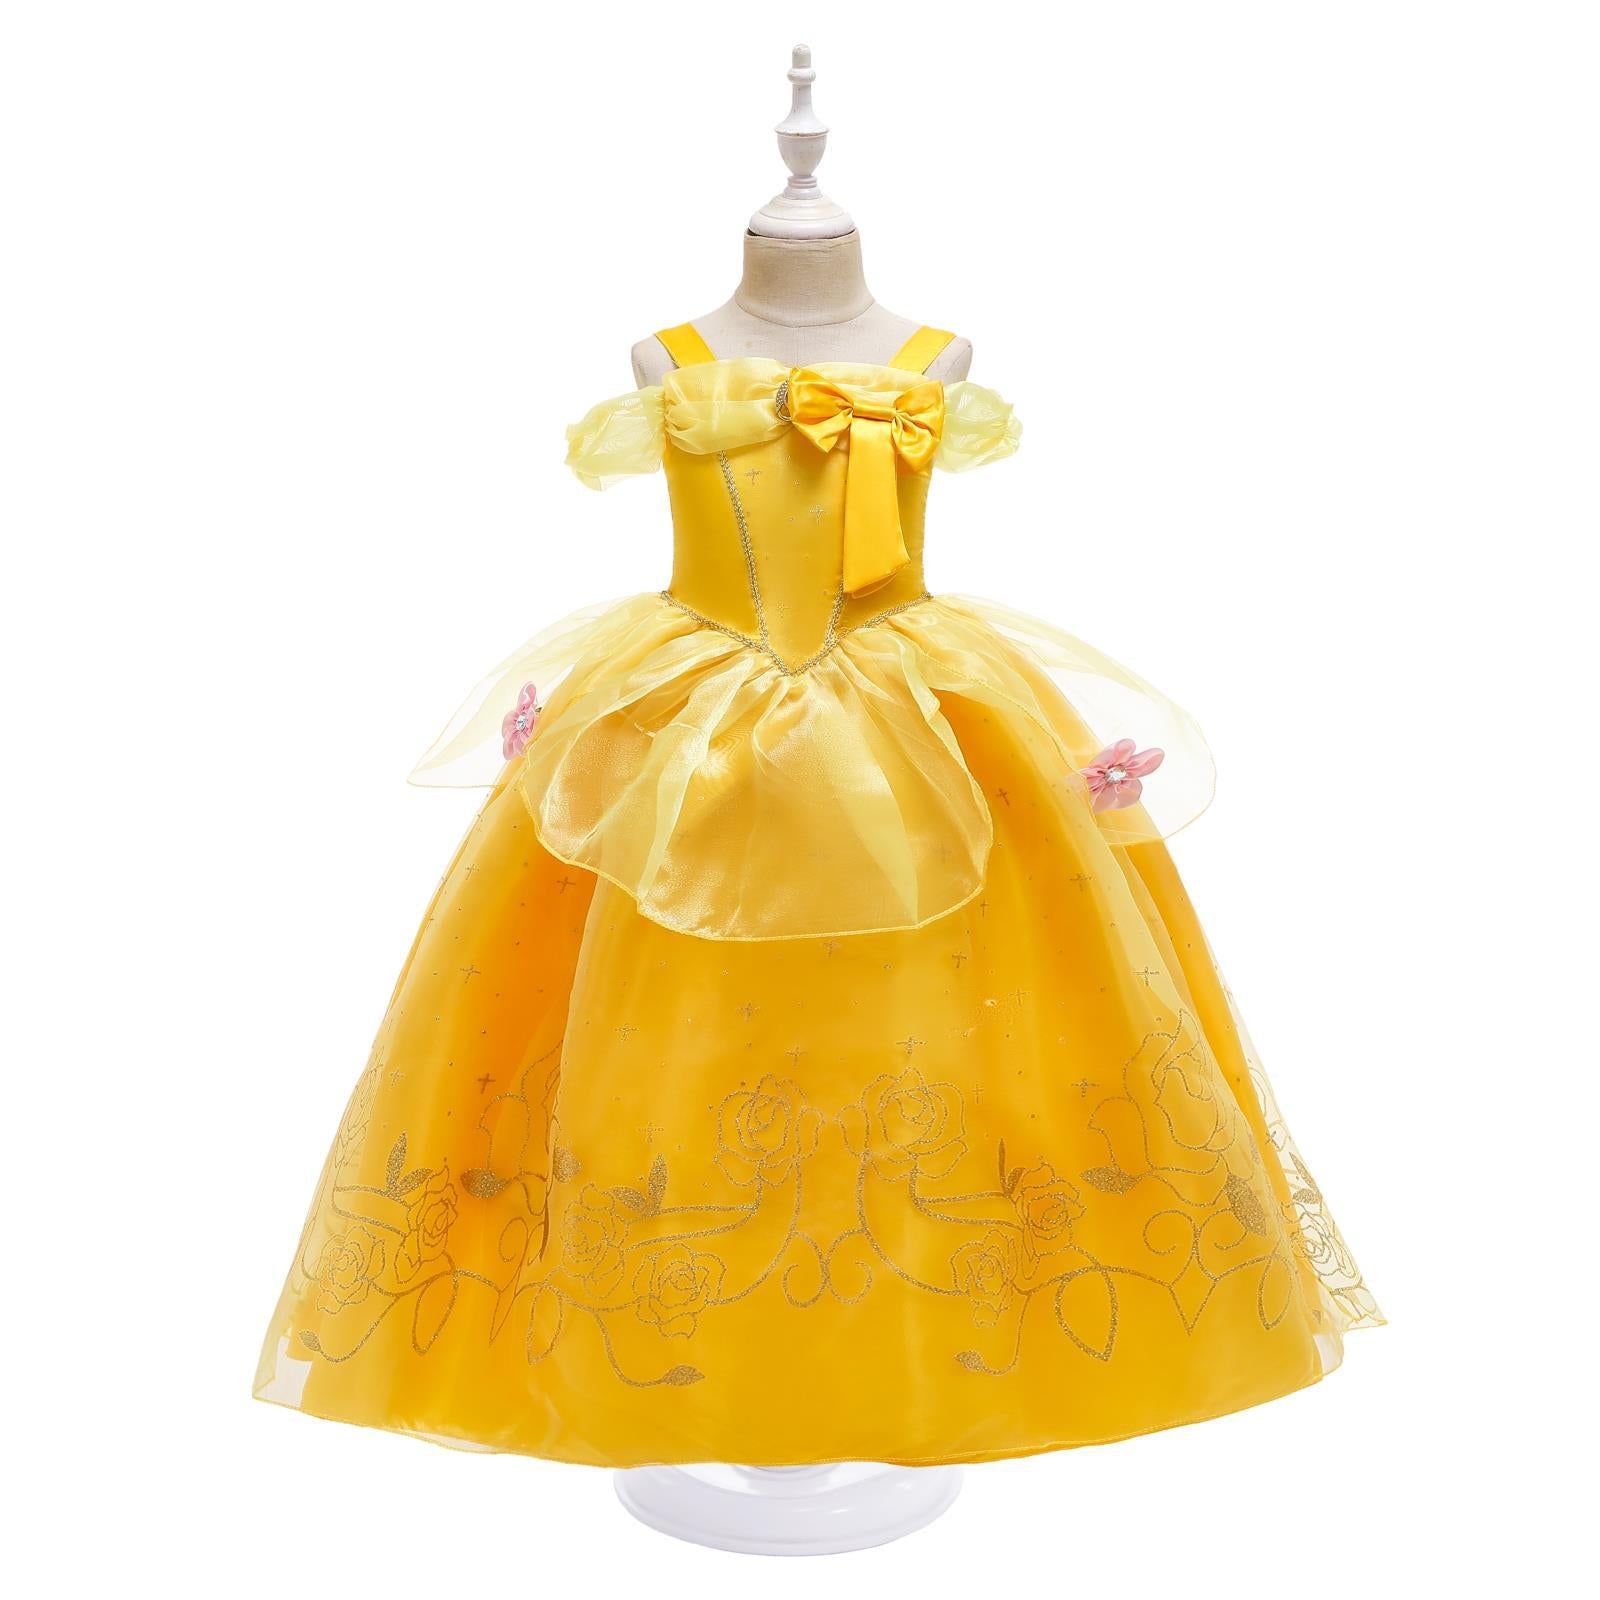 Magical Fairy Tale Dress Collection for Little Princesses